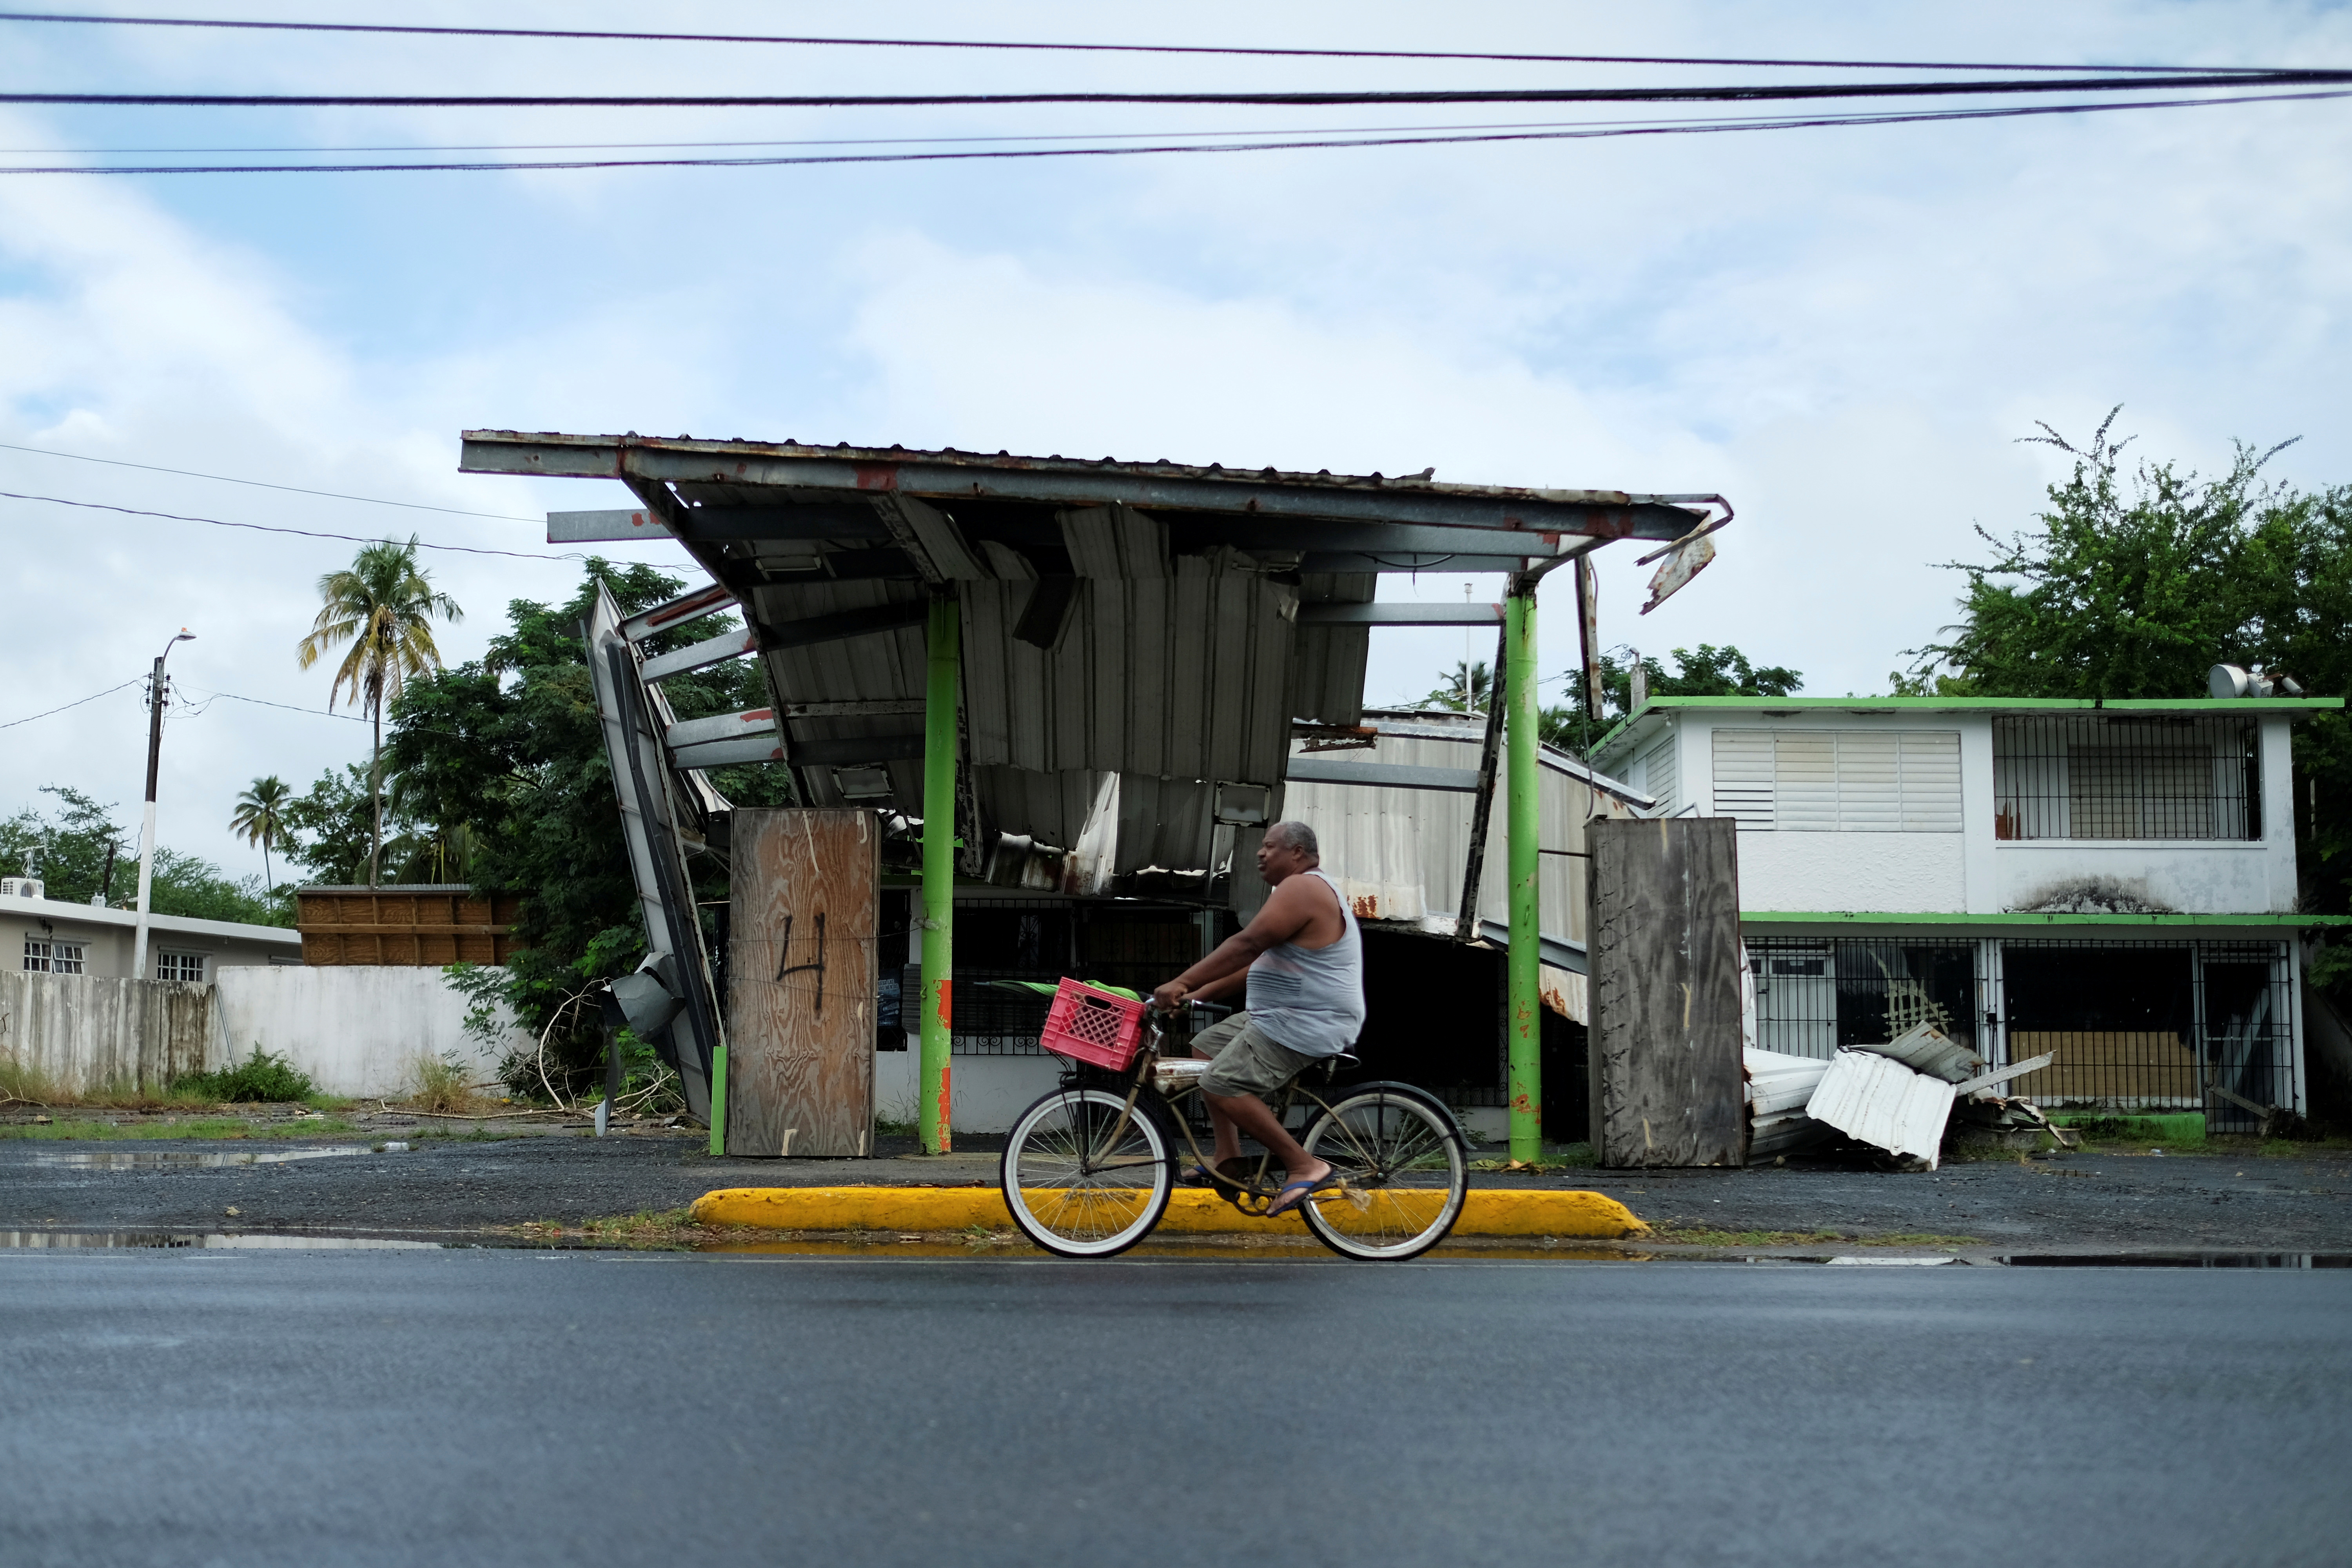 A man rides his bicycle past a gas station that was damaged by Hurricane Maria two years ago, as Tropical Storm Karen approaches in Loiza